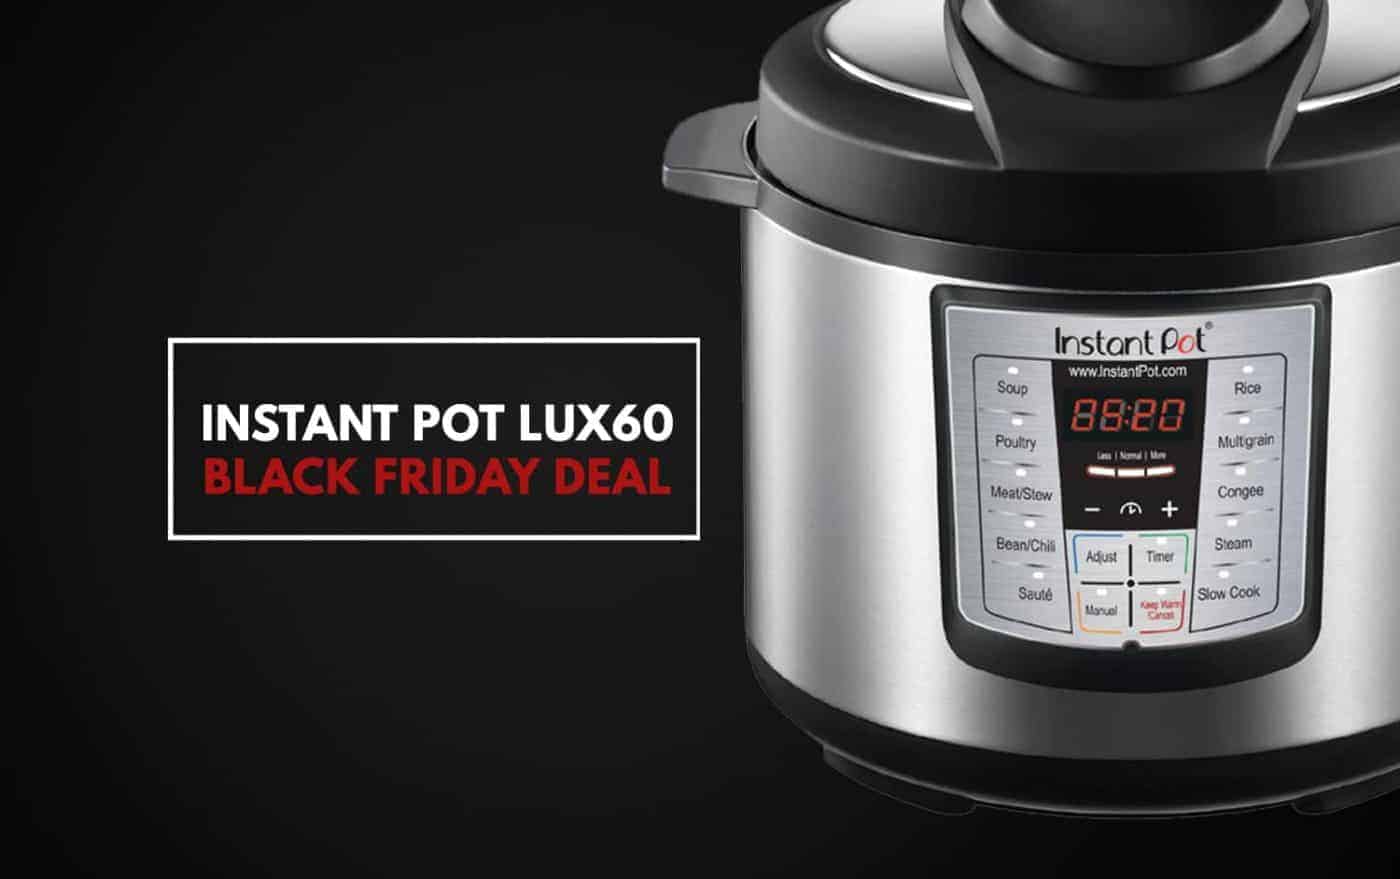 Instant Pot Black Friday Deal Lowest Price Ever & Never Again!